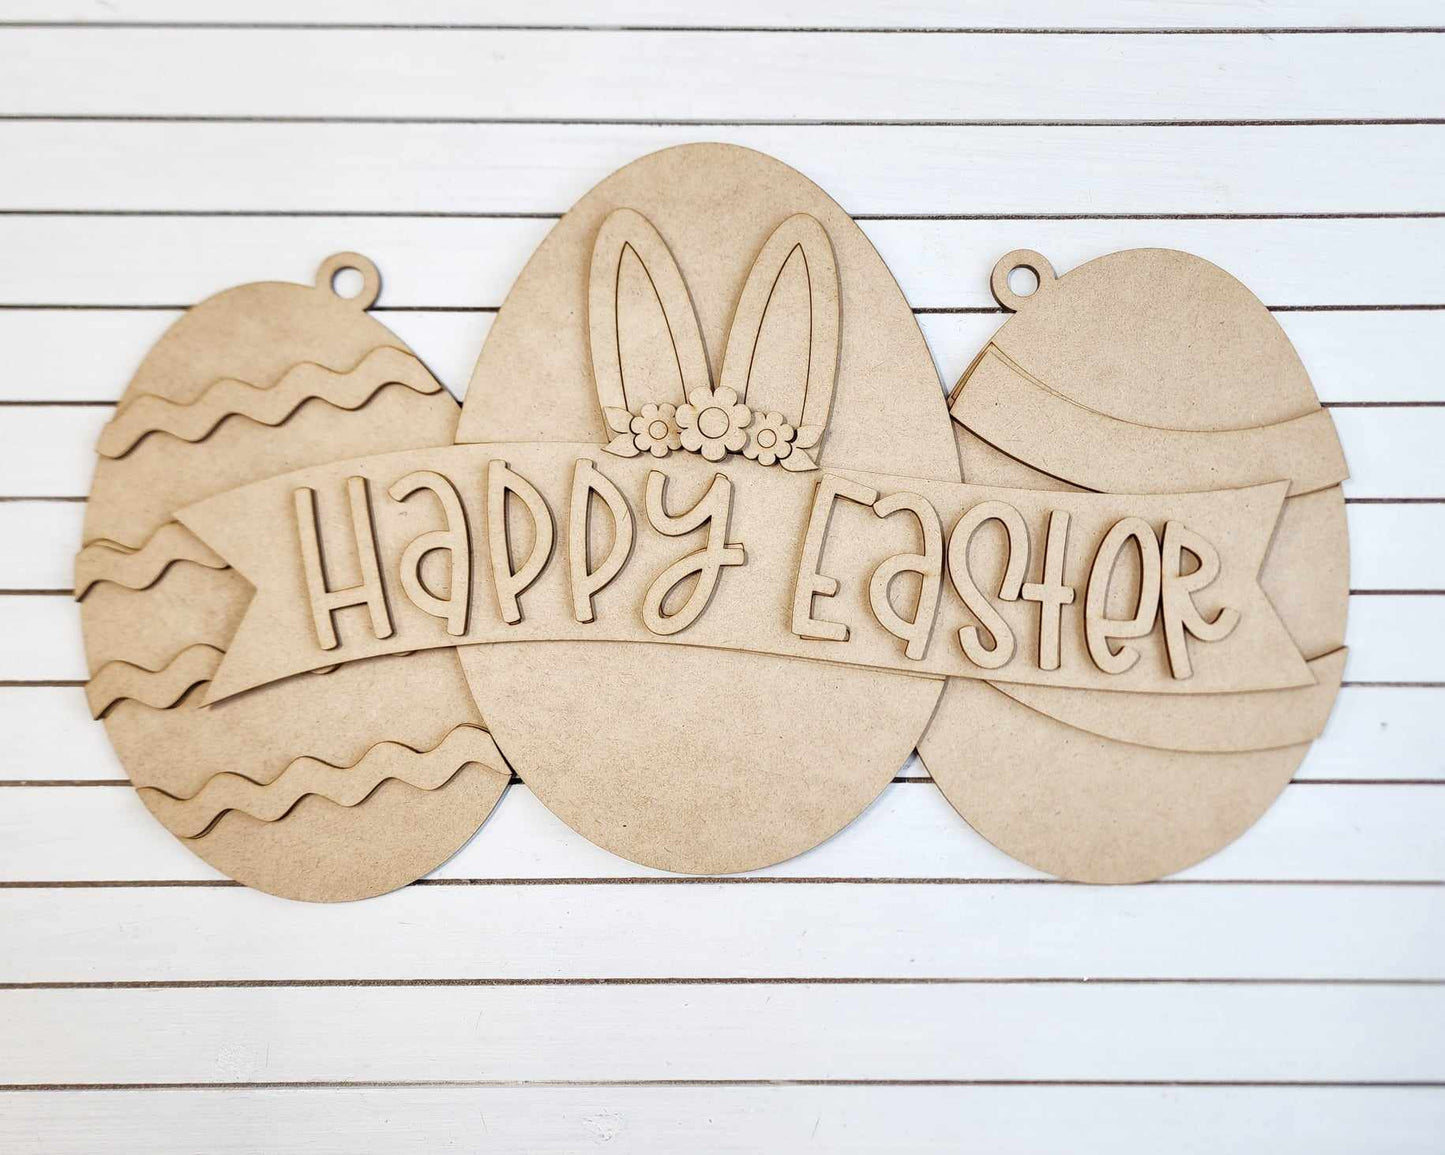 Happy Easter - Easter Egg Door Sign - Wood Cutouts unpainted ready for you to paint